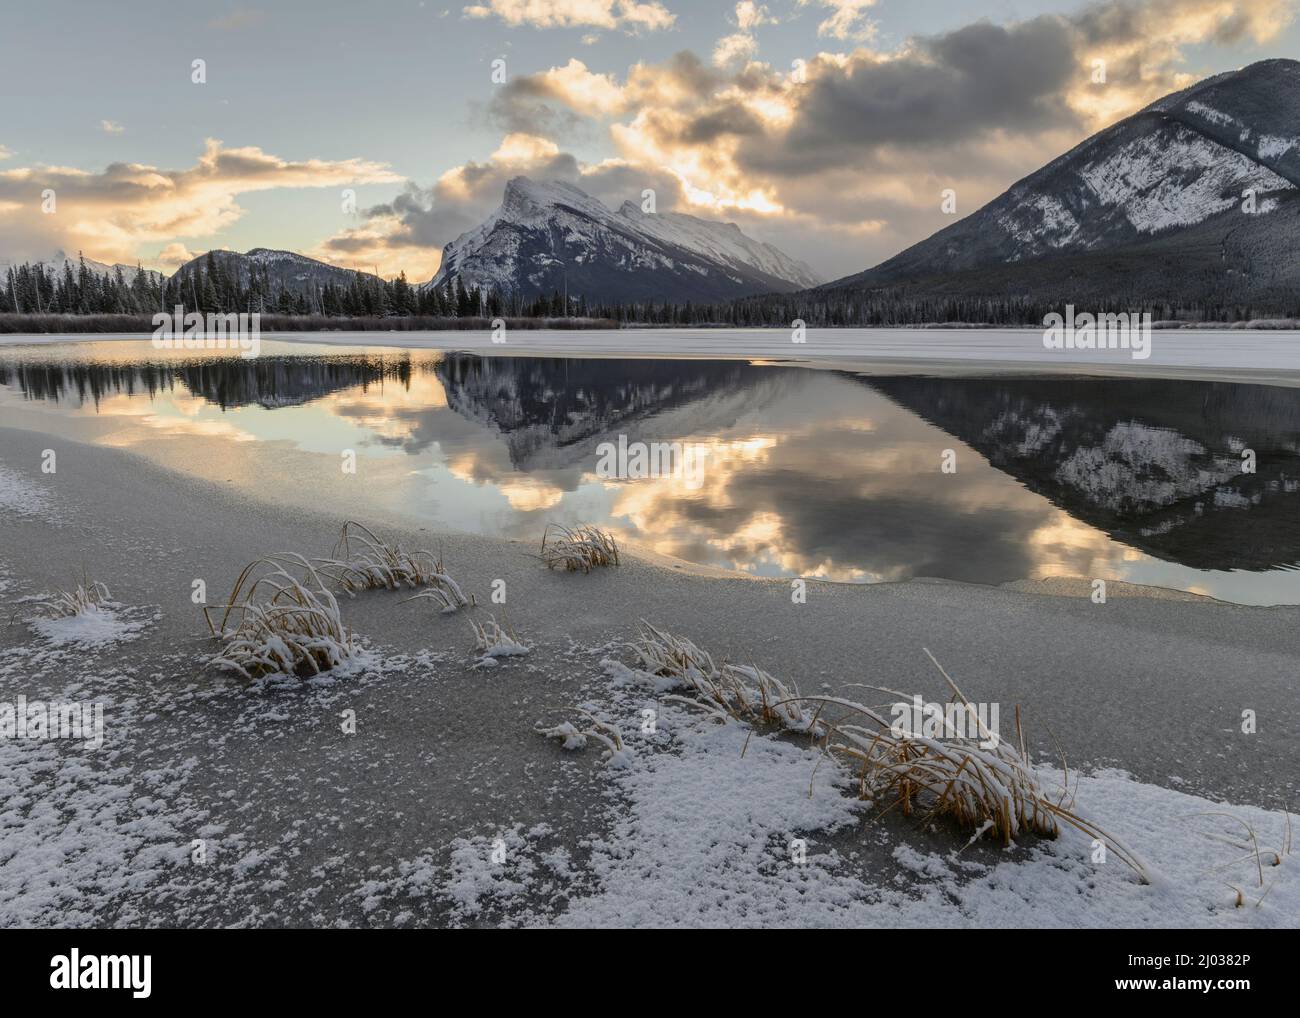 Sunrise at Mount Rundle and Vermillion Lakes with ice and snow, Banff National Park, UNESCO World Heritage Site, Alberta, Canadian Rockies, Canada Stock Photo